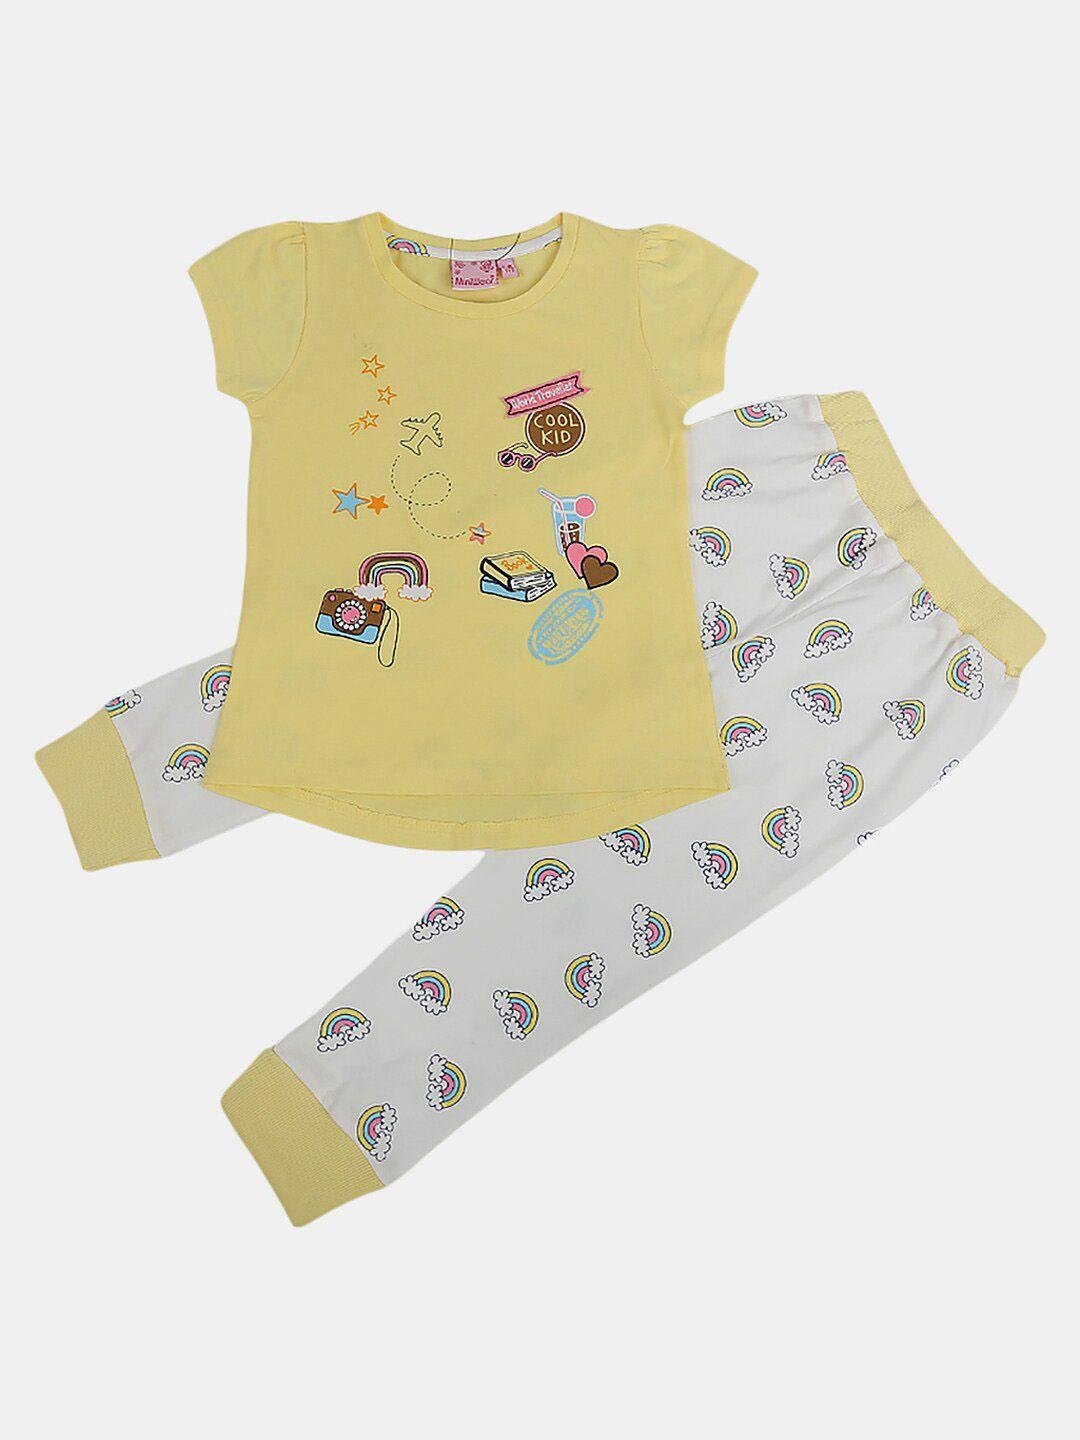 v-mart kids pure cotton printed top with leggings